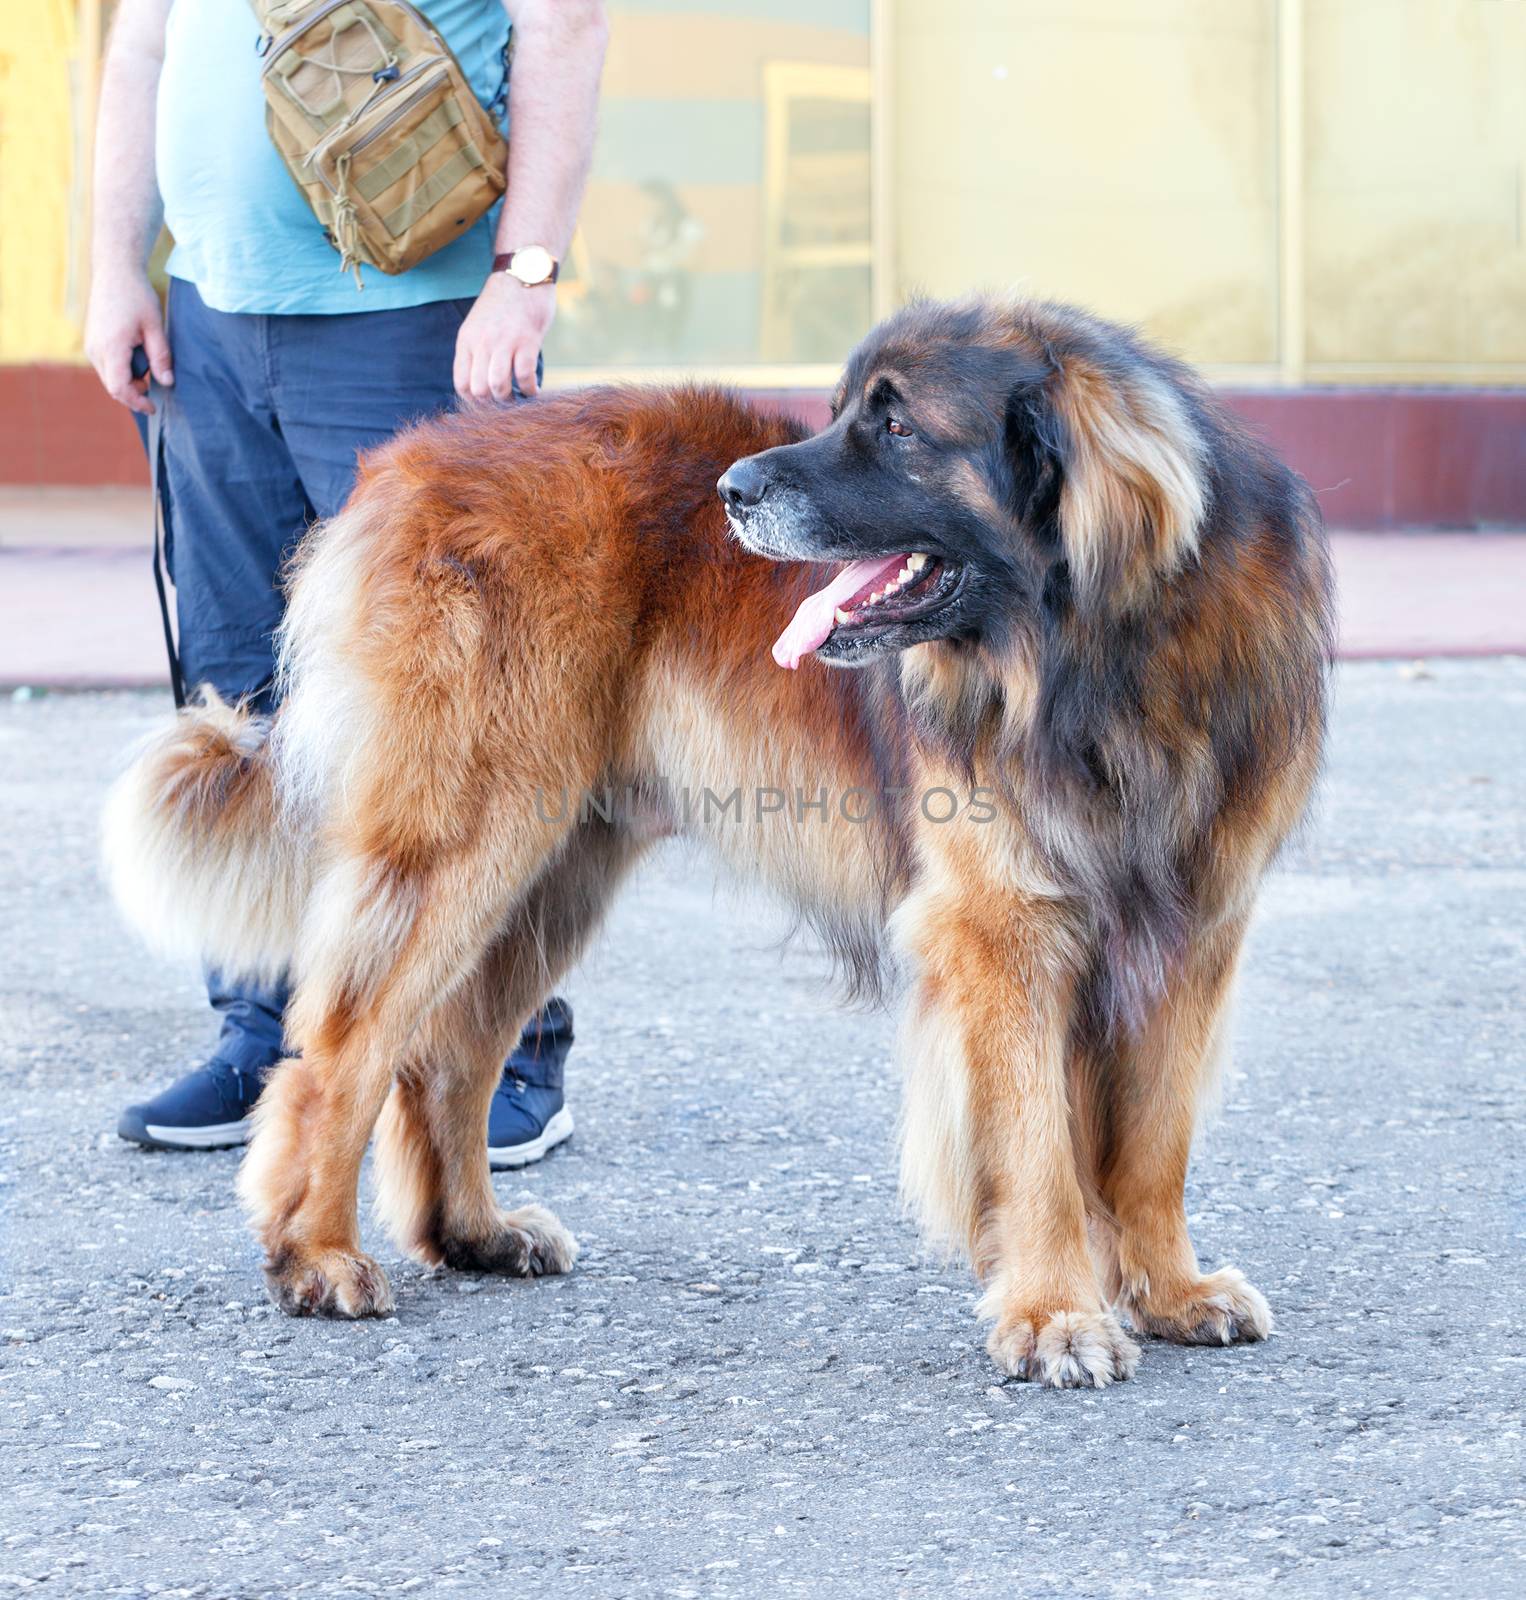 The Leonberger dog stands on the asphalt sidewalk with an open mouth, a large breed of dog, easy to train, sensible dogs with excellent guard qualities.